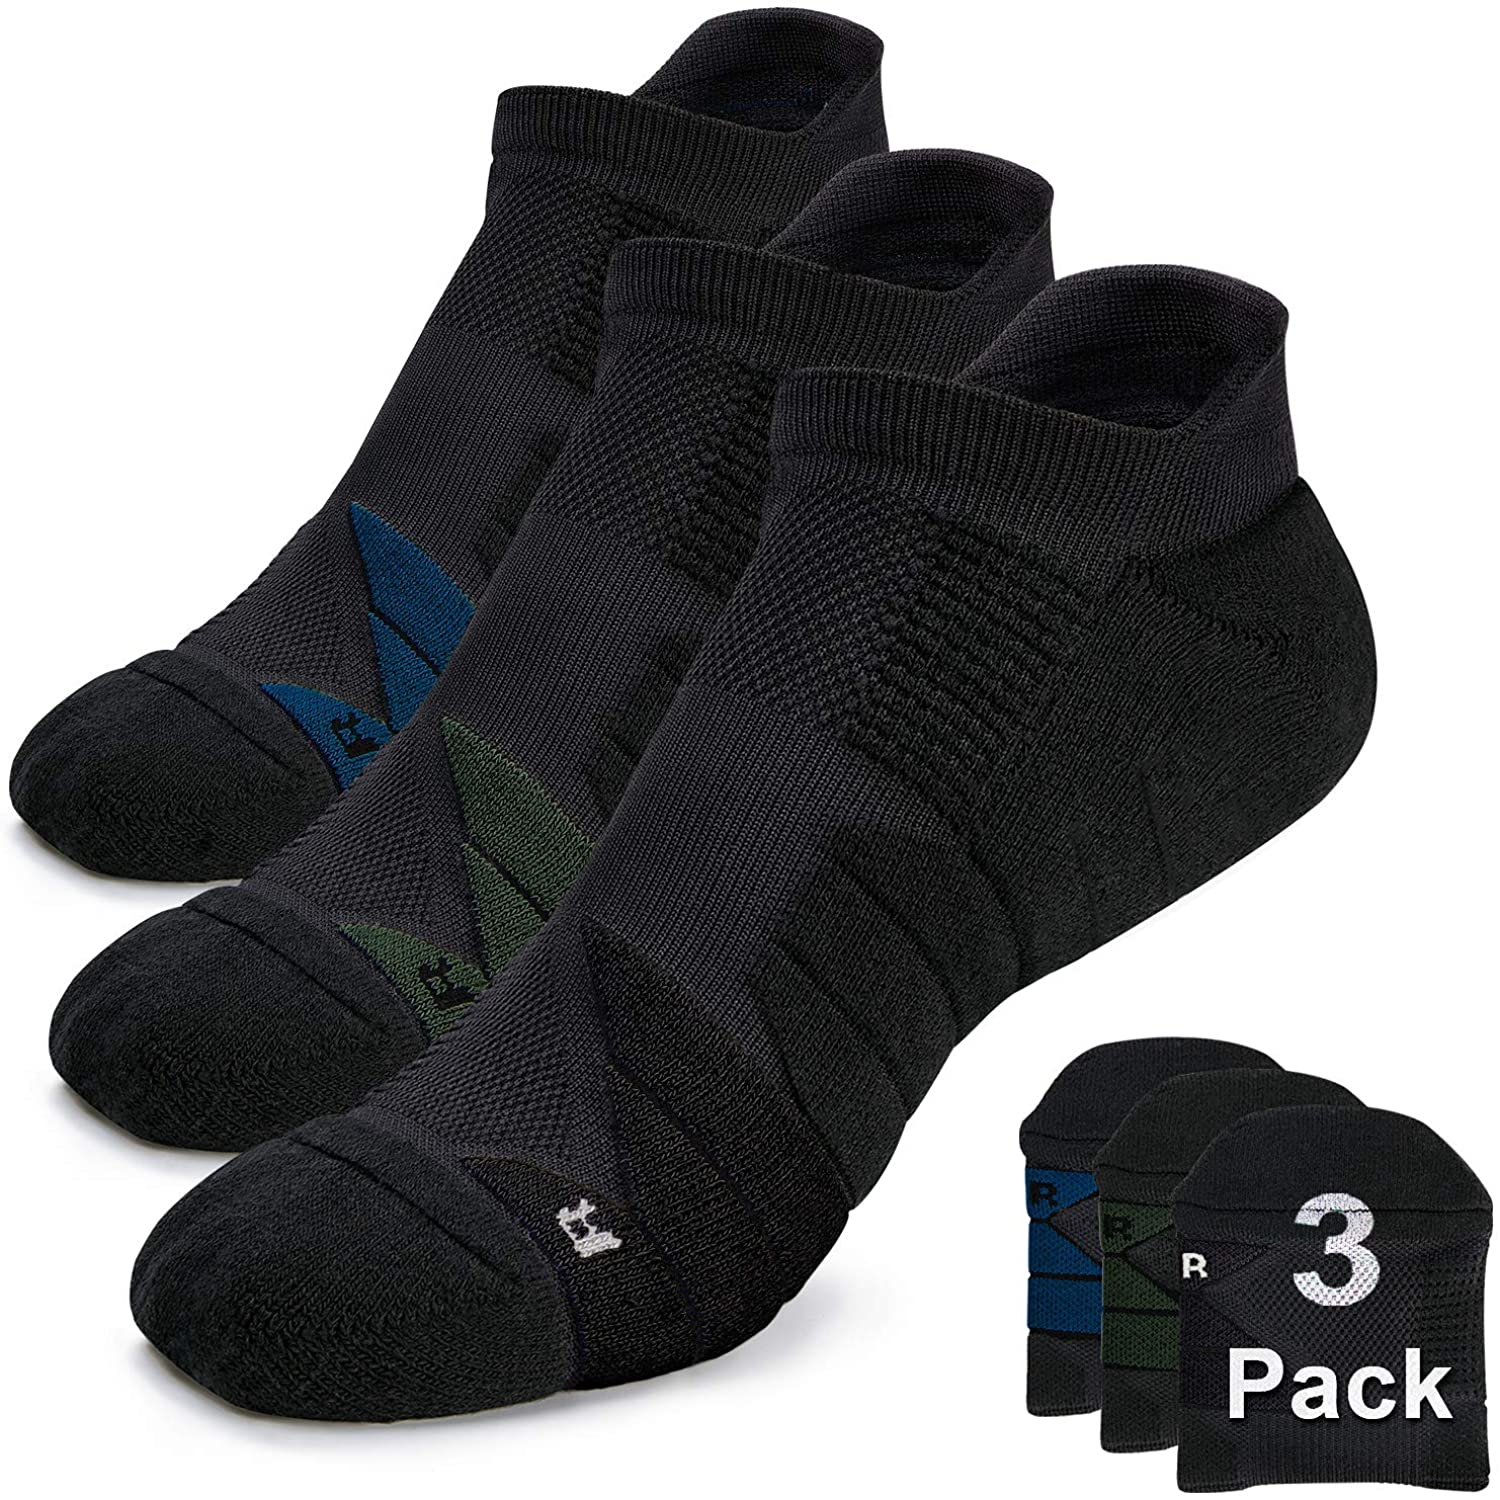 Compression Athletic No Show Running Socks with, 3 Pairs-black, Size ...